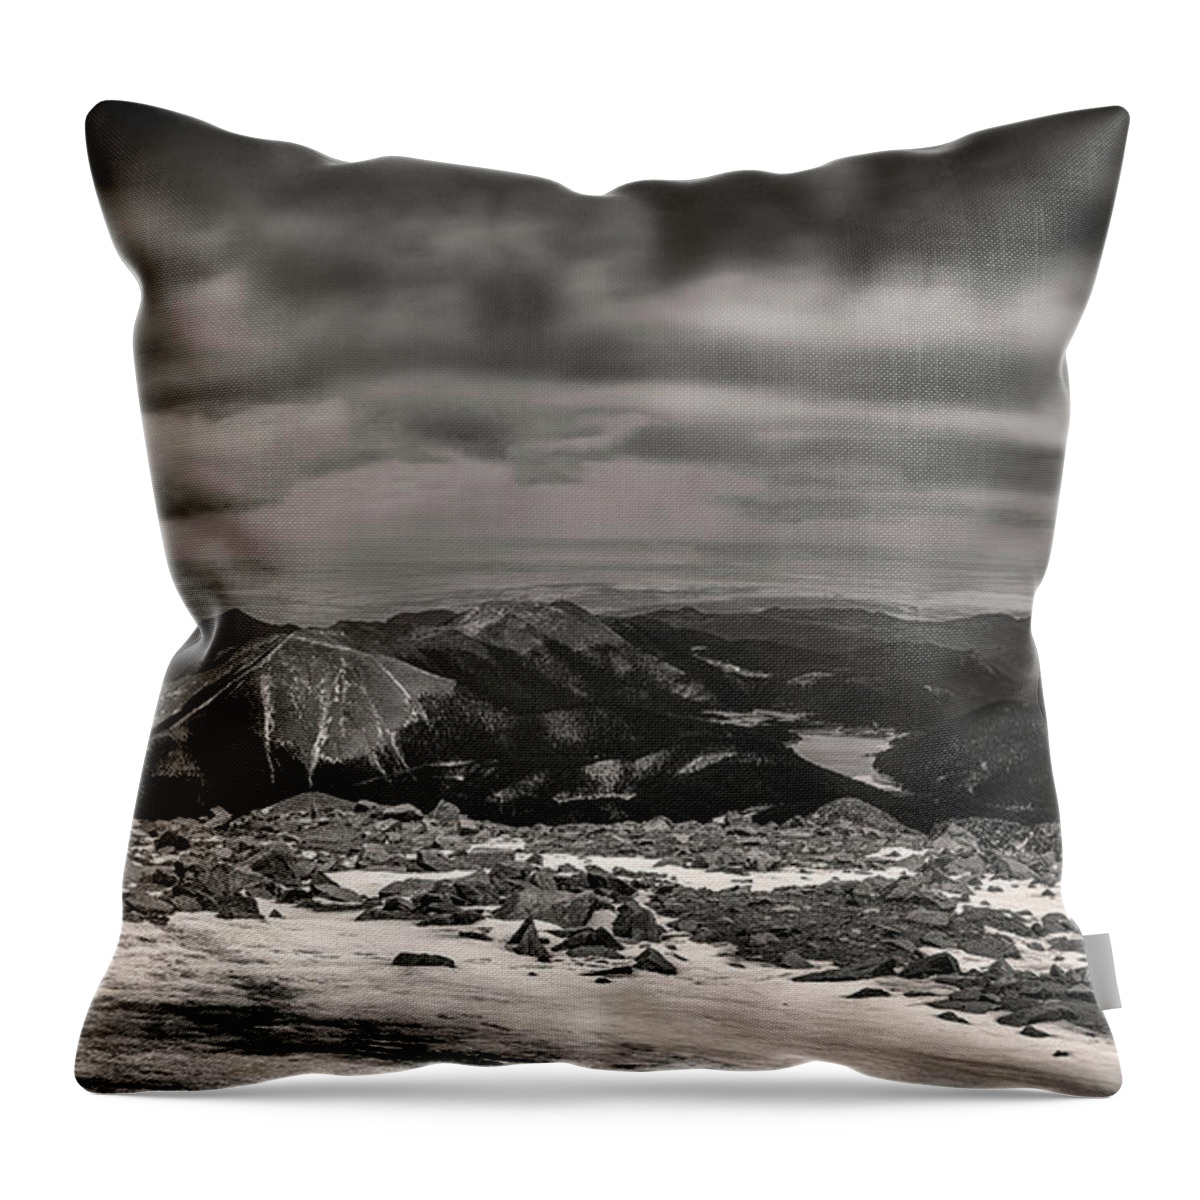 Colorado Throw Pillow featuring the photograph From The Top by Robert Fawcett